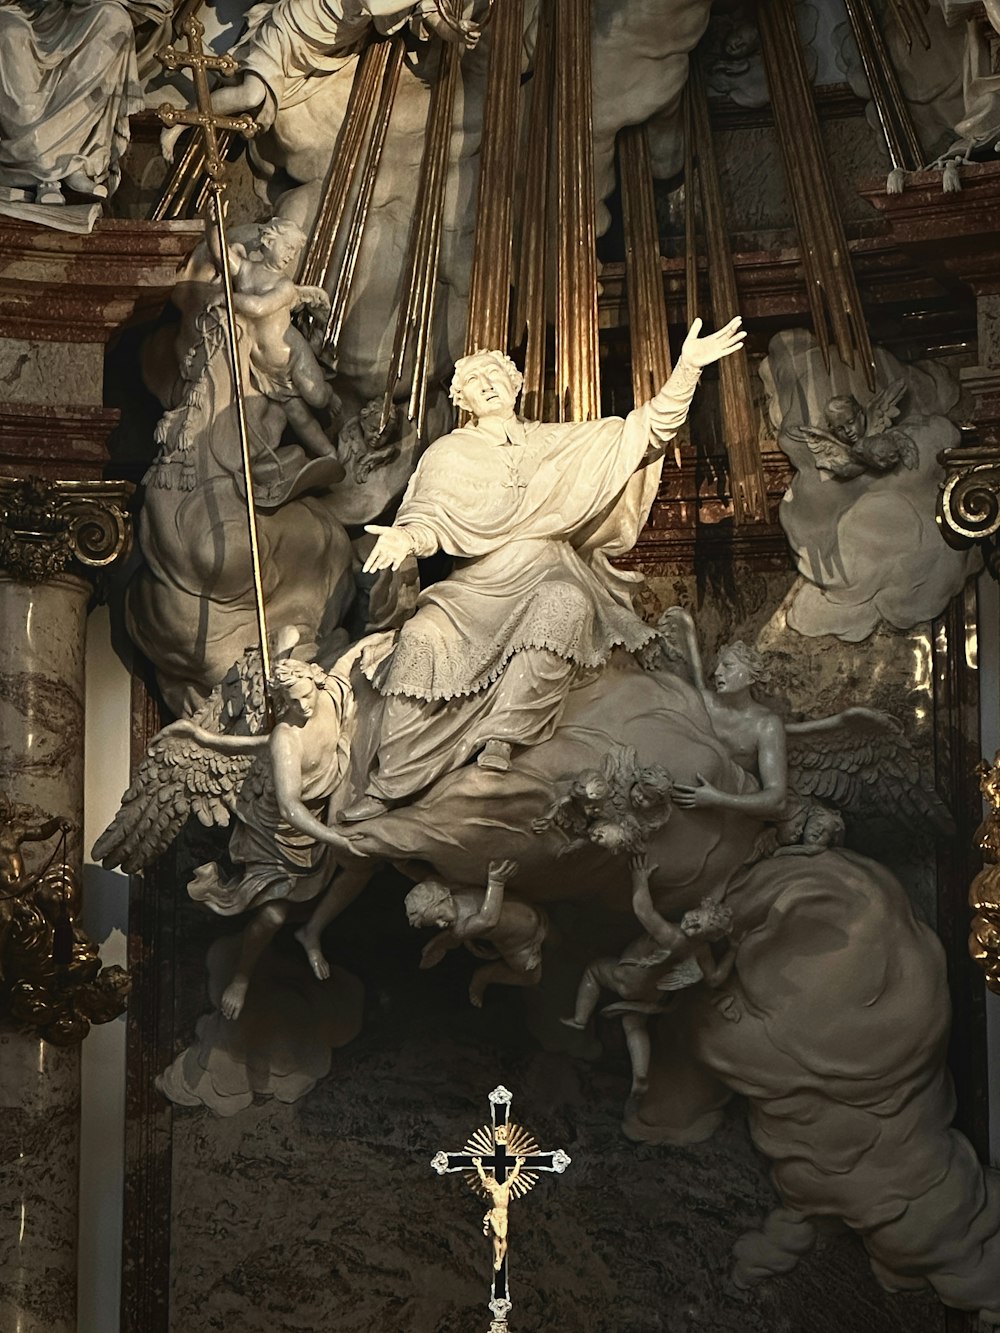 a statue of jesus on a horse in a church